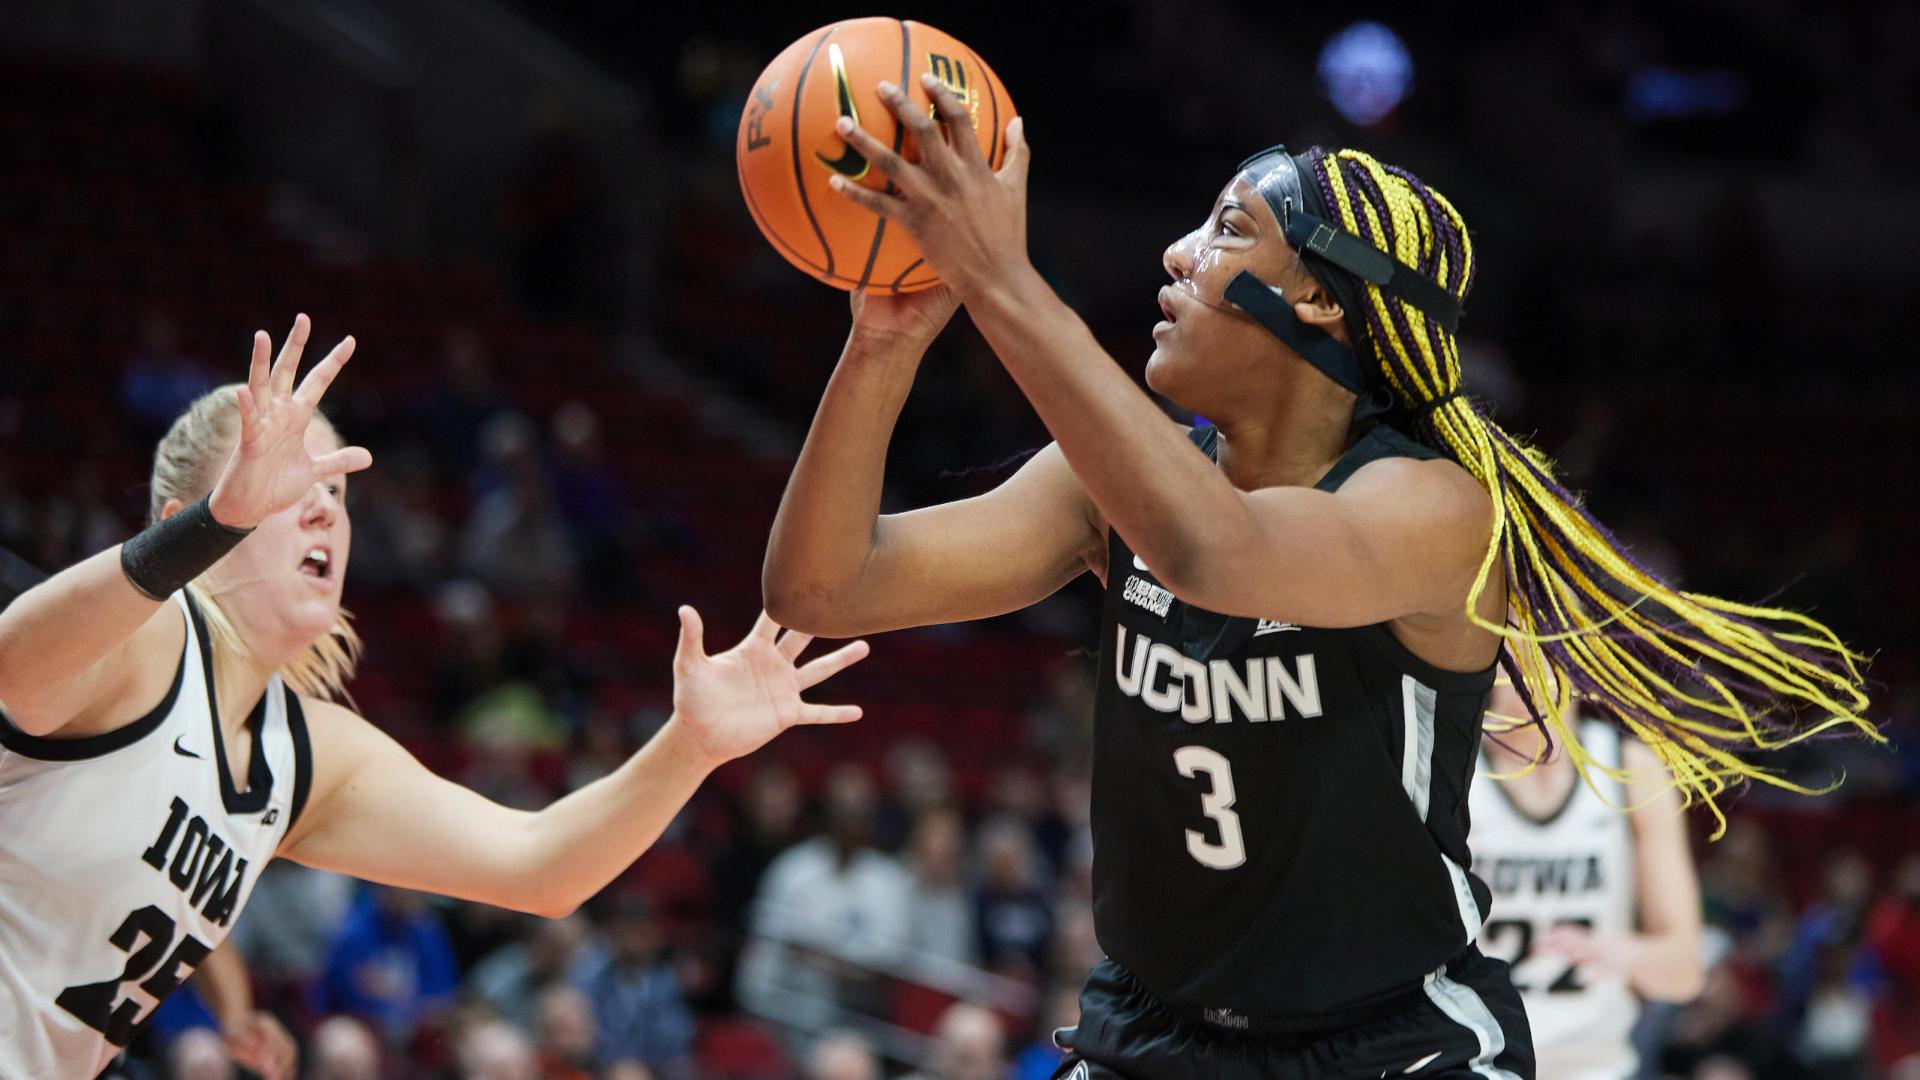 UConn storms back in second half to win Phil Knight Legacy Championship